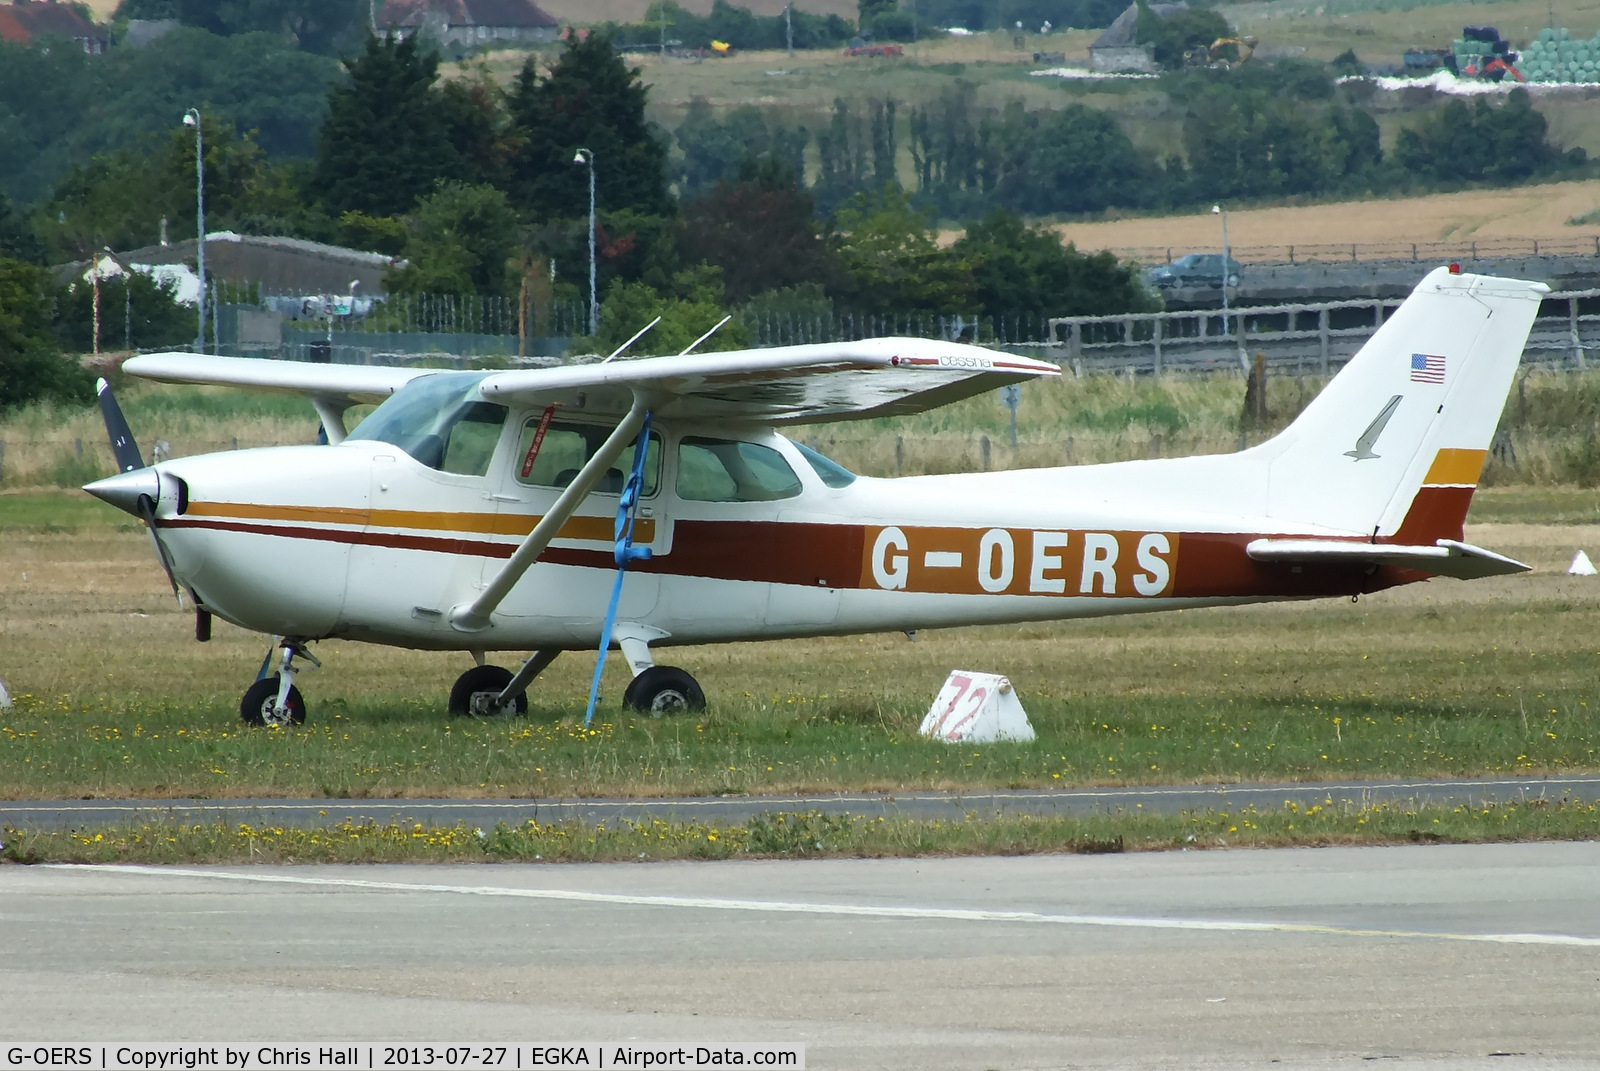 G-OERS, 1977 Cessna 172N C/N 172-68856, former Leicester resident now based at Shorham